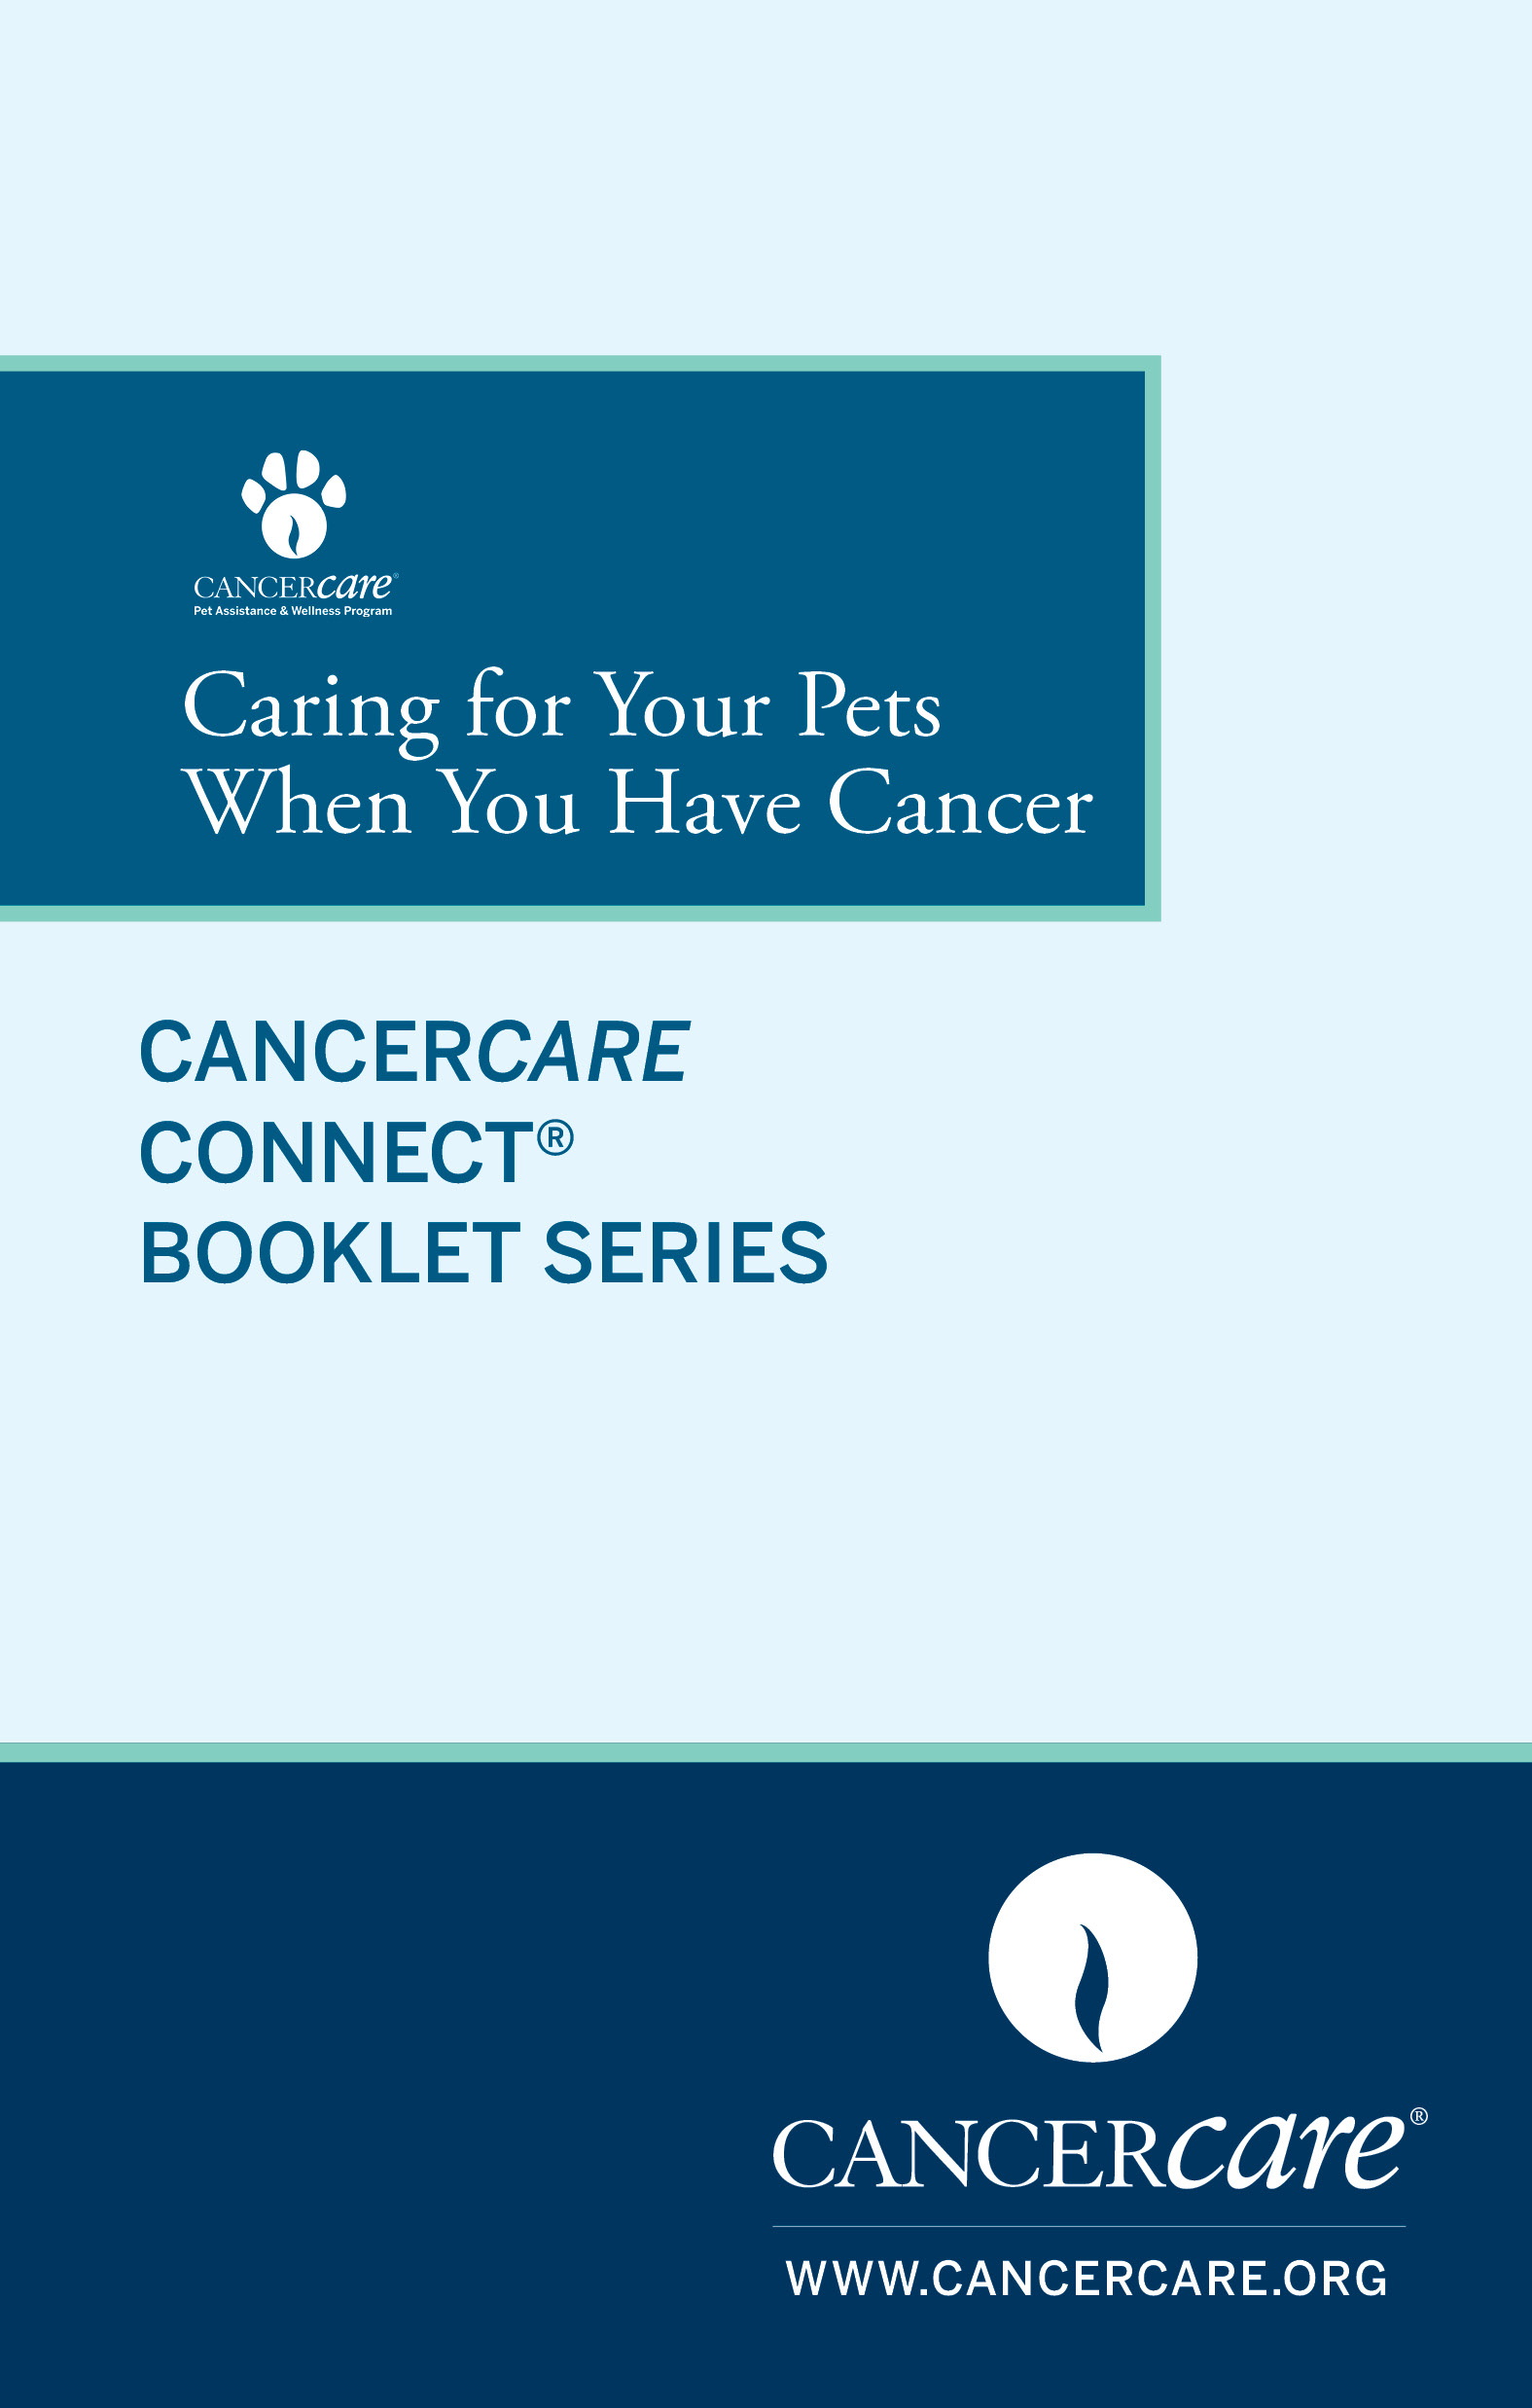 Thumbnail of the flipbook version of Caring for Your Pets When You Have Cancer